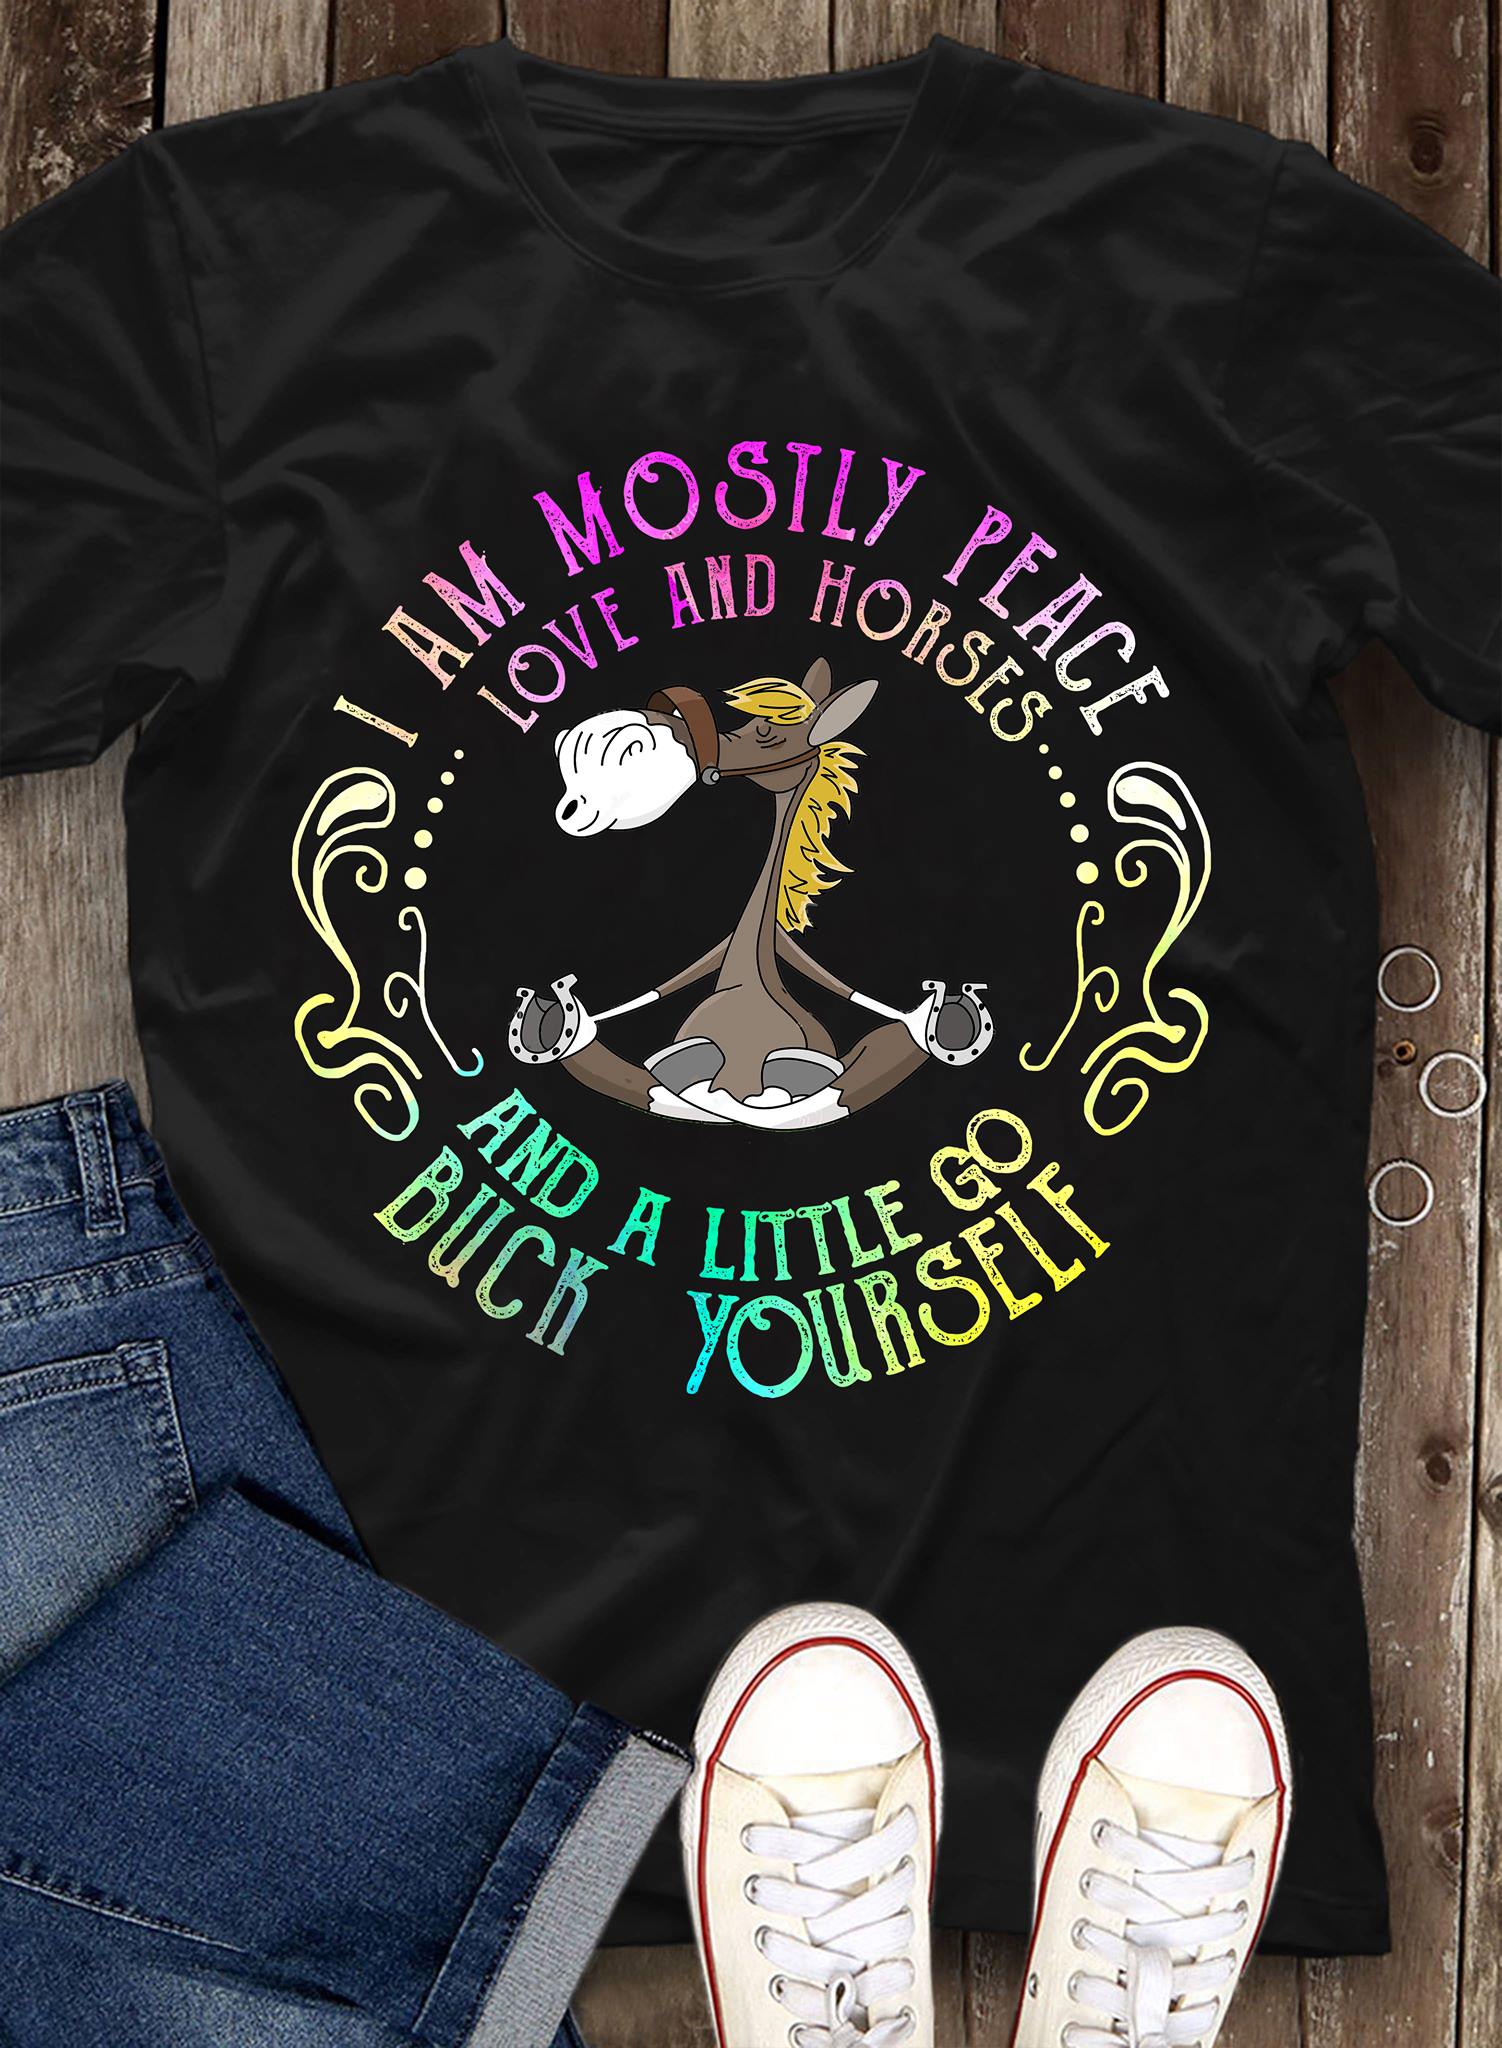 I am mostly peace love and horses and a little go buck yourself - Yoga horse